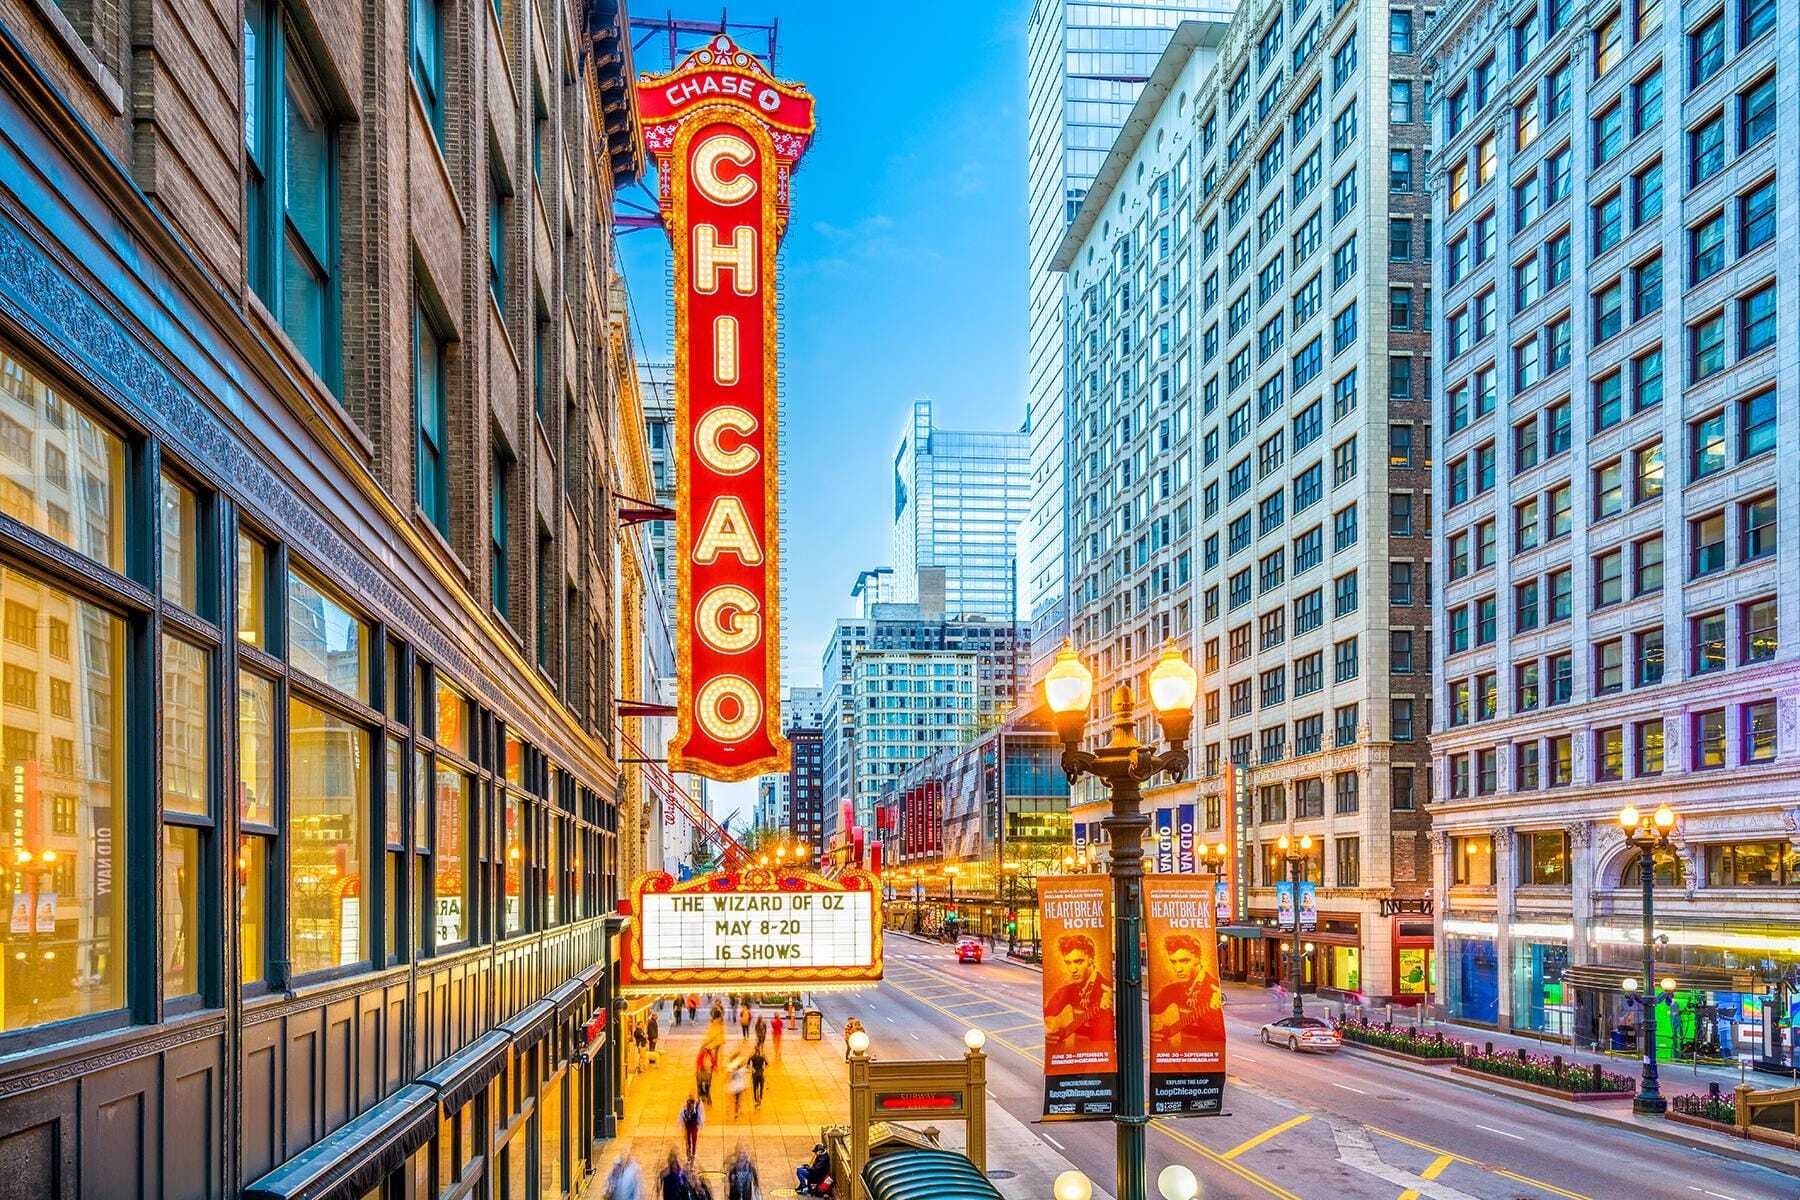 An image of downtown Chicago.